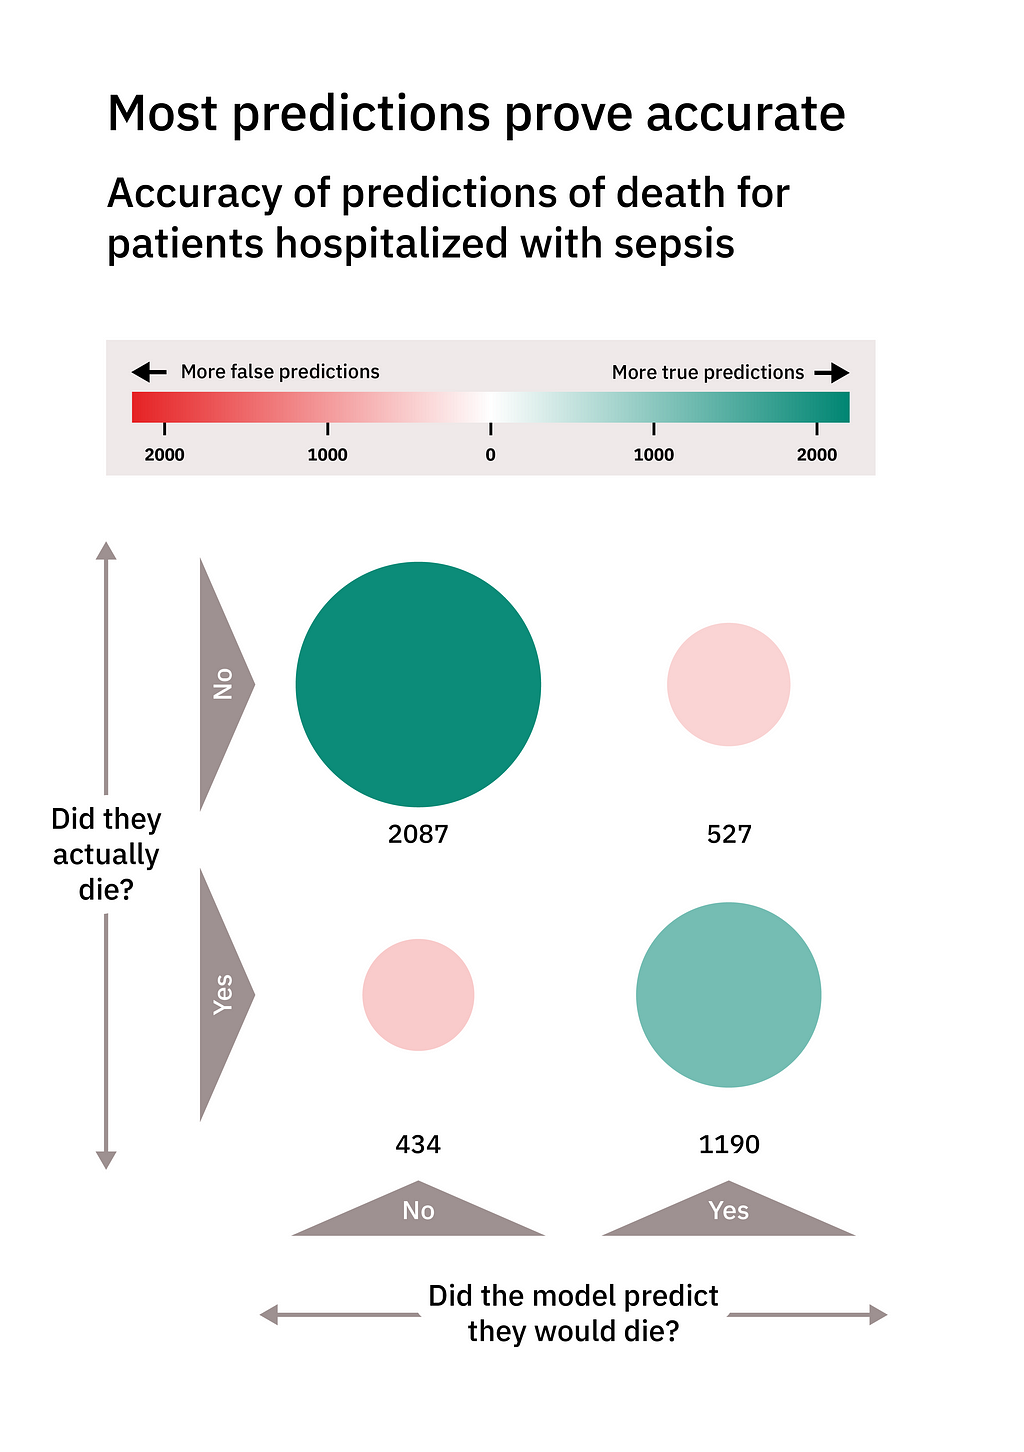 Image showing the accuracy of predictions of death for patients hospitalized with sepsis